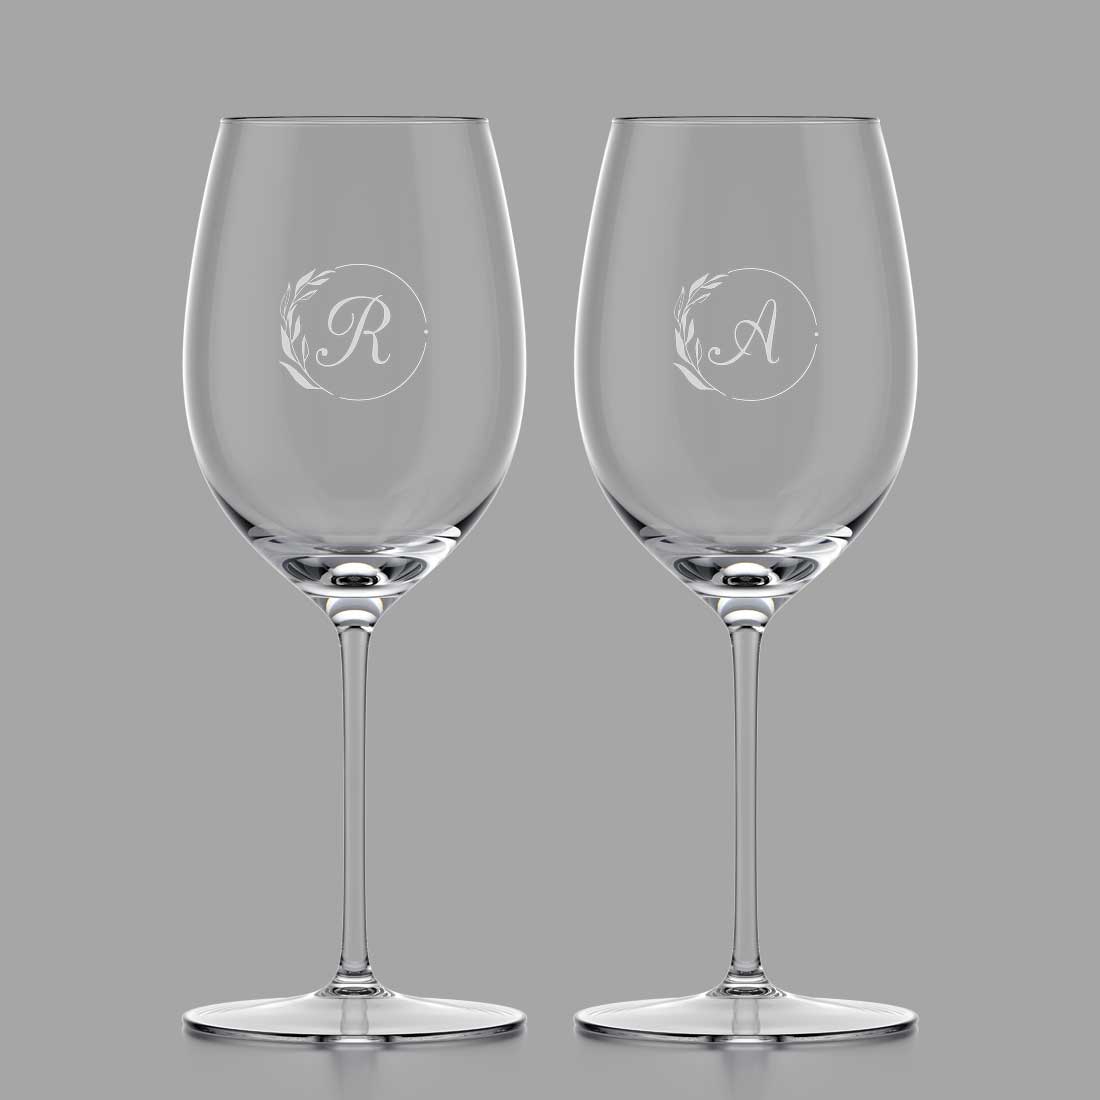 Customized Wine Glasses for Couples